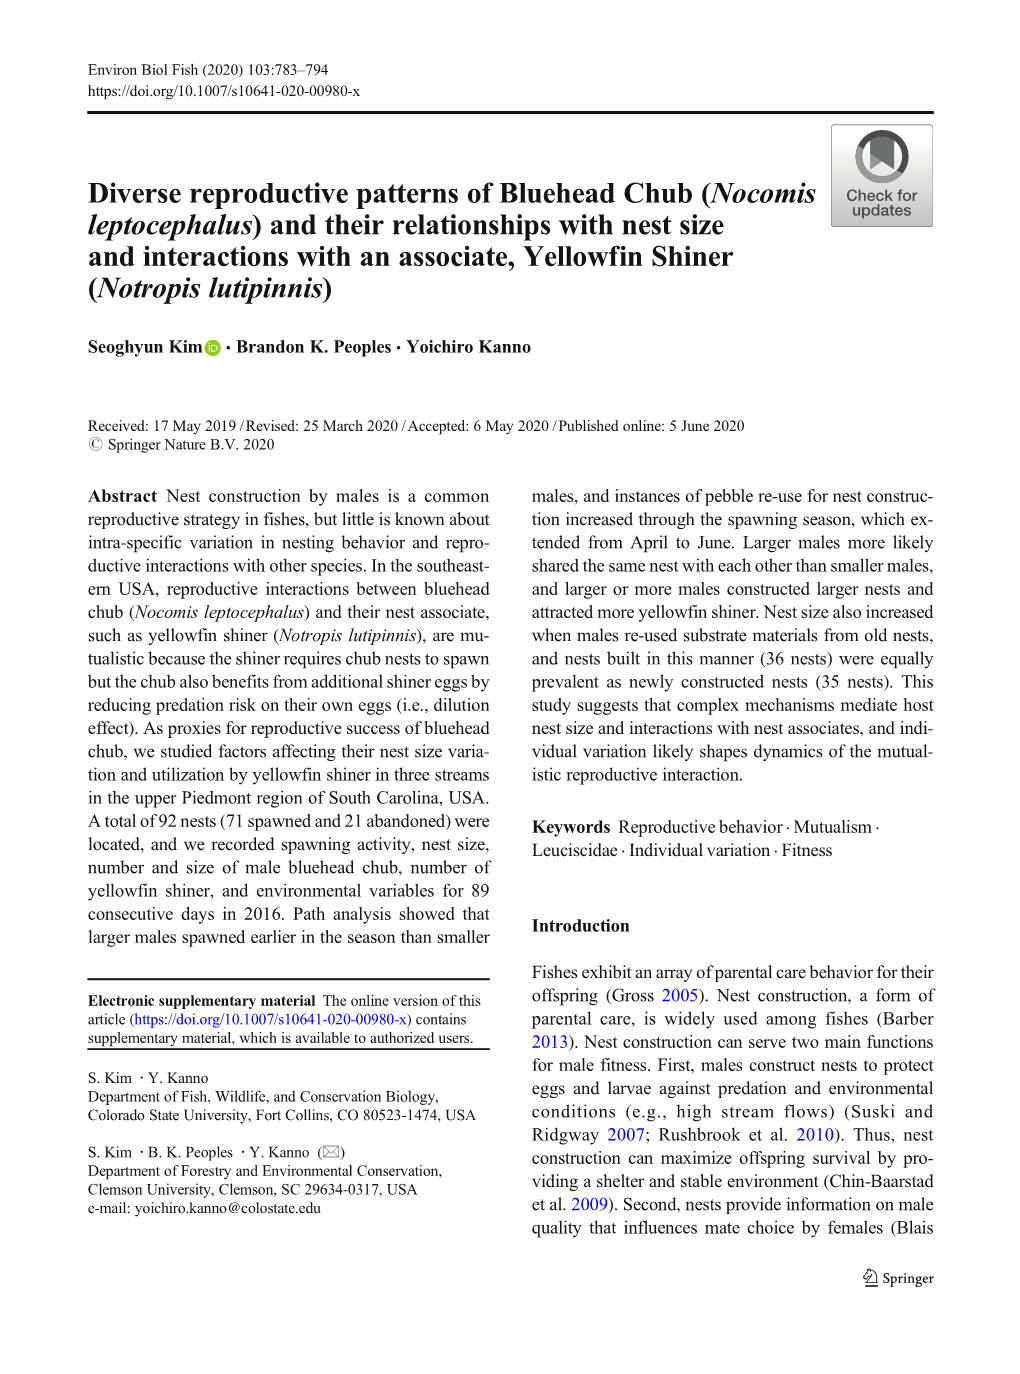 Diverse Reproductive Patterns of Bluehead Chub (Nocomis